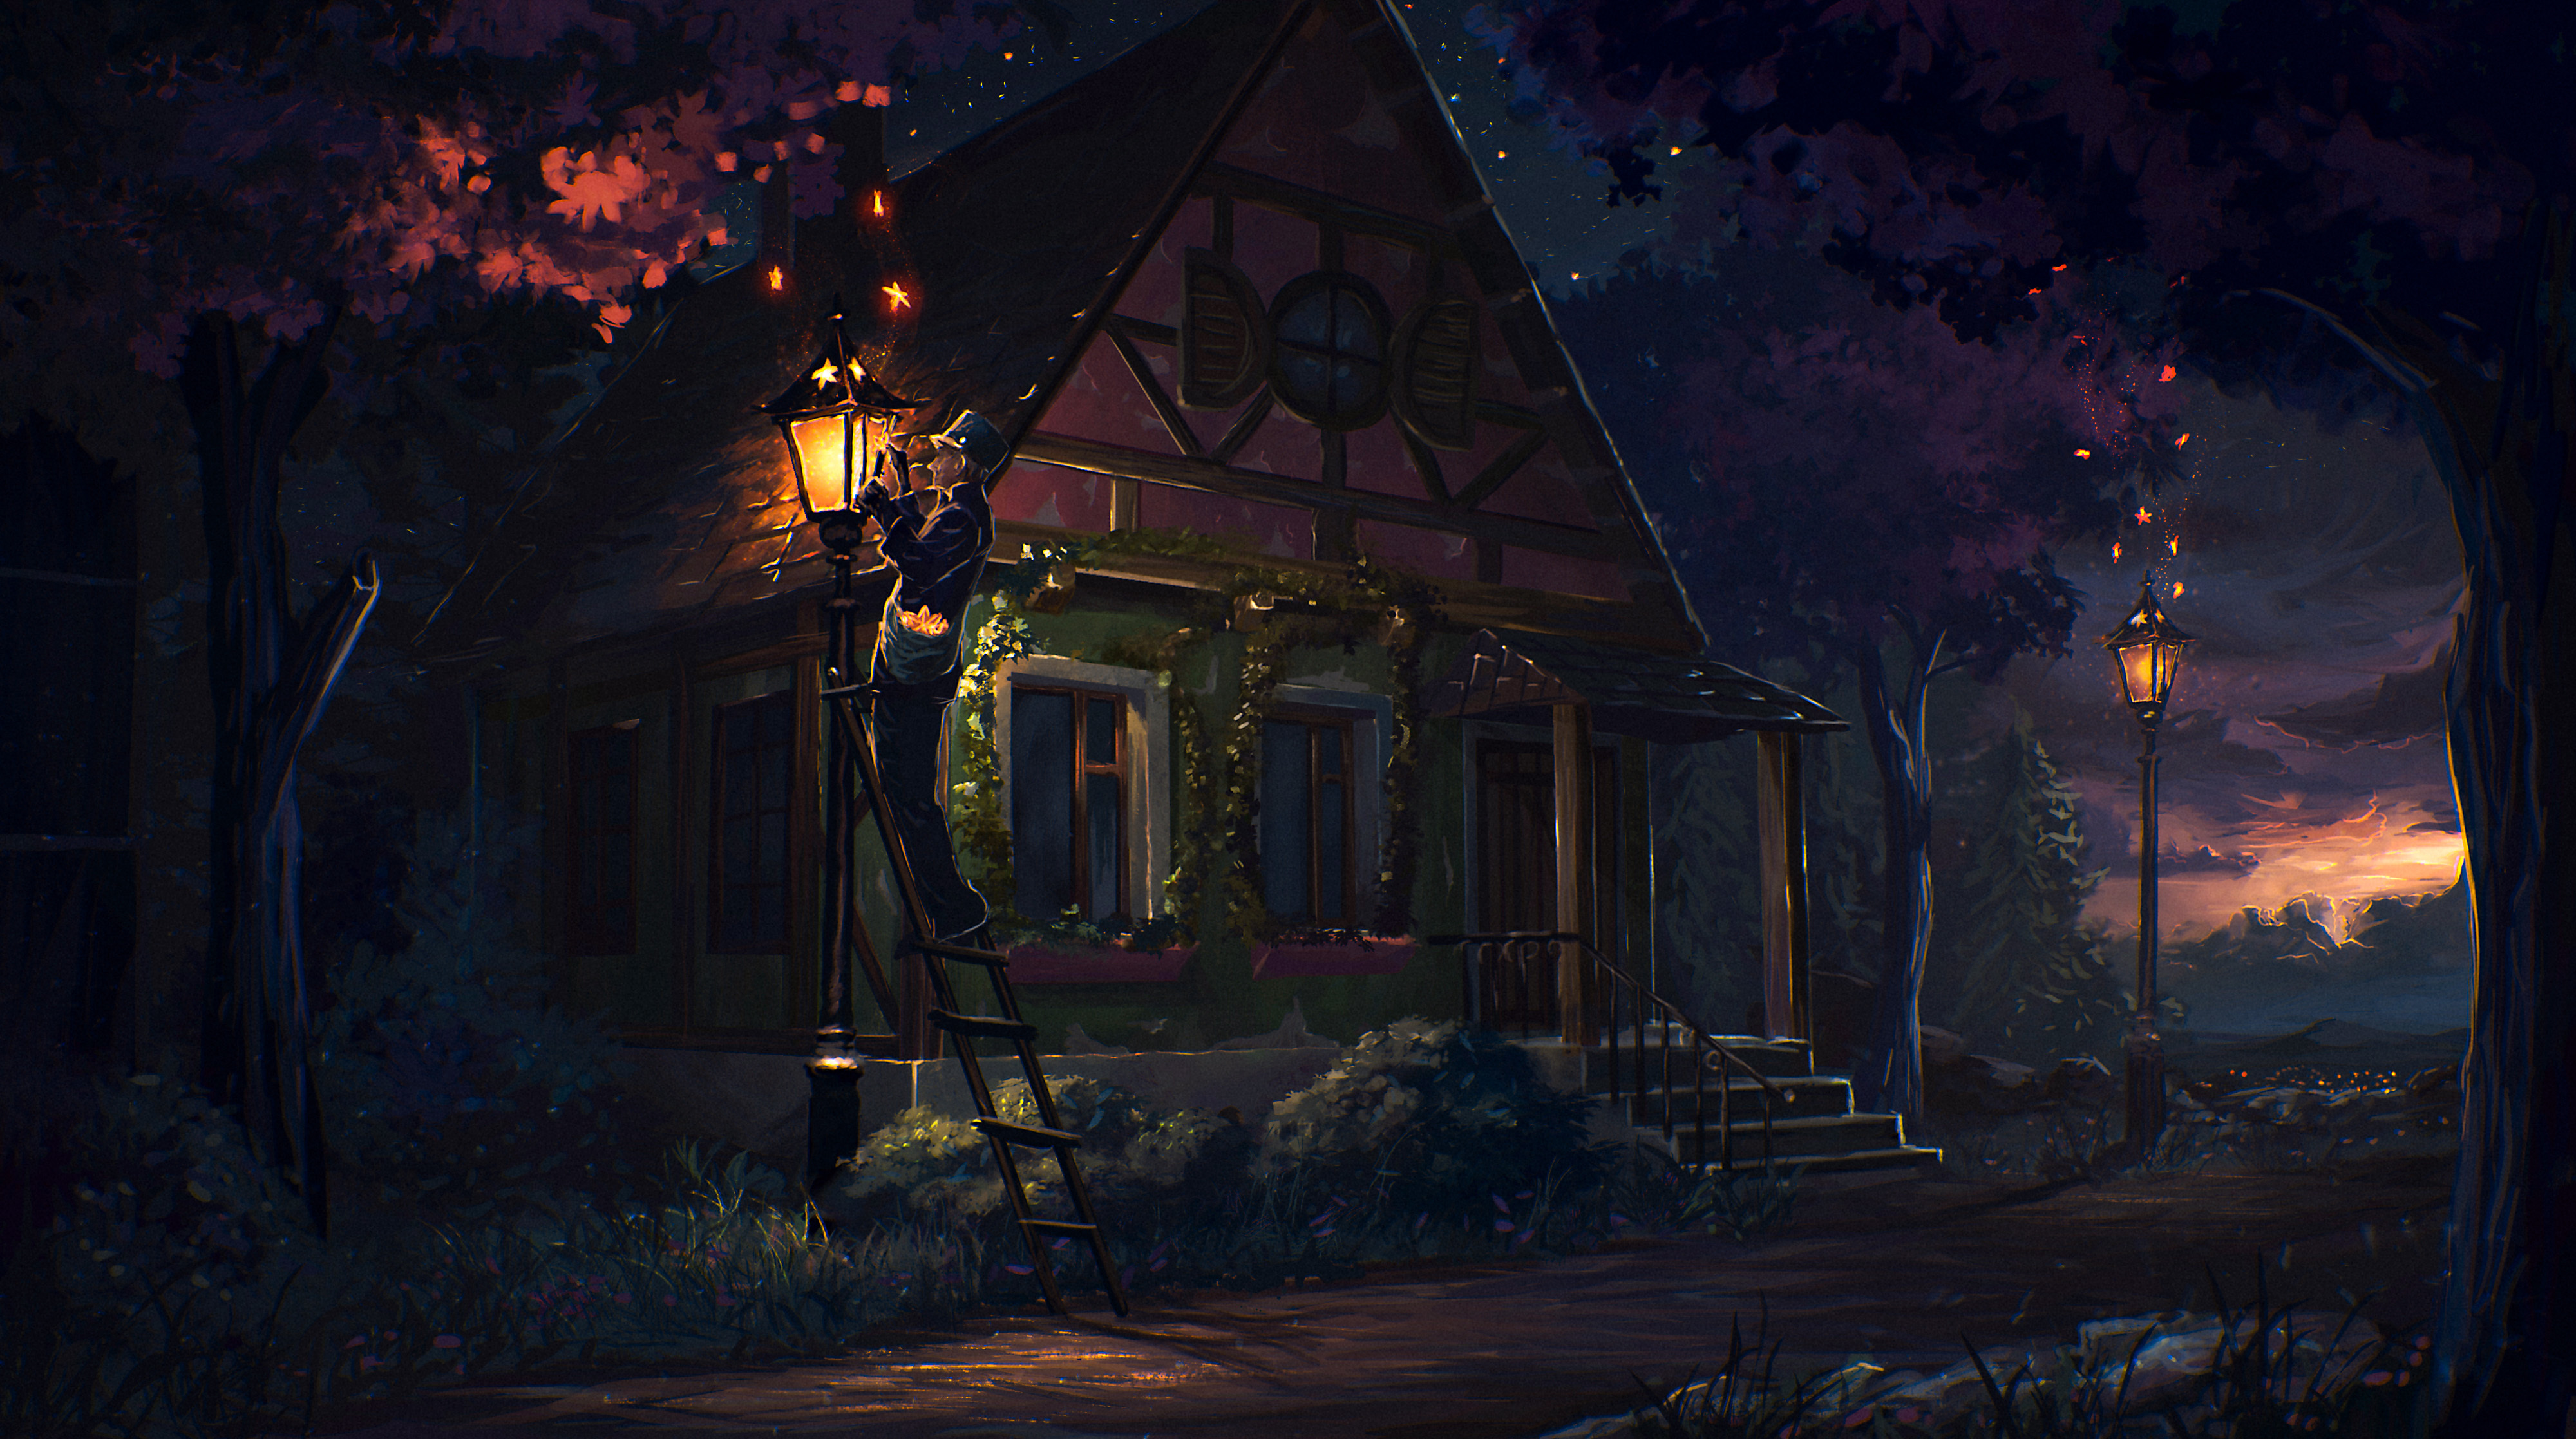 Cool Wallpapers fantasy, art, fairy tale, night, house, lamp, lantern, story